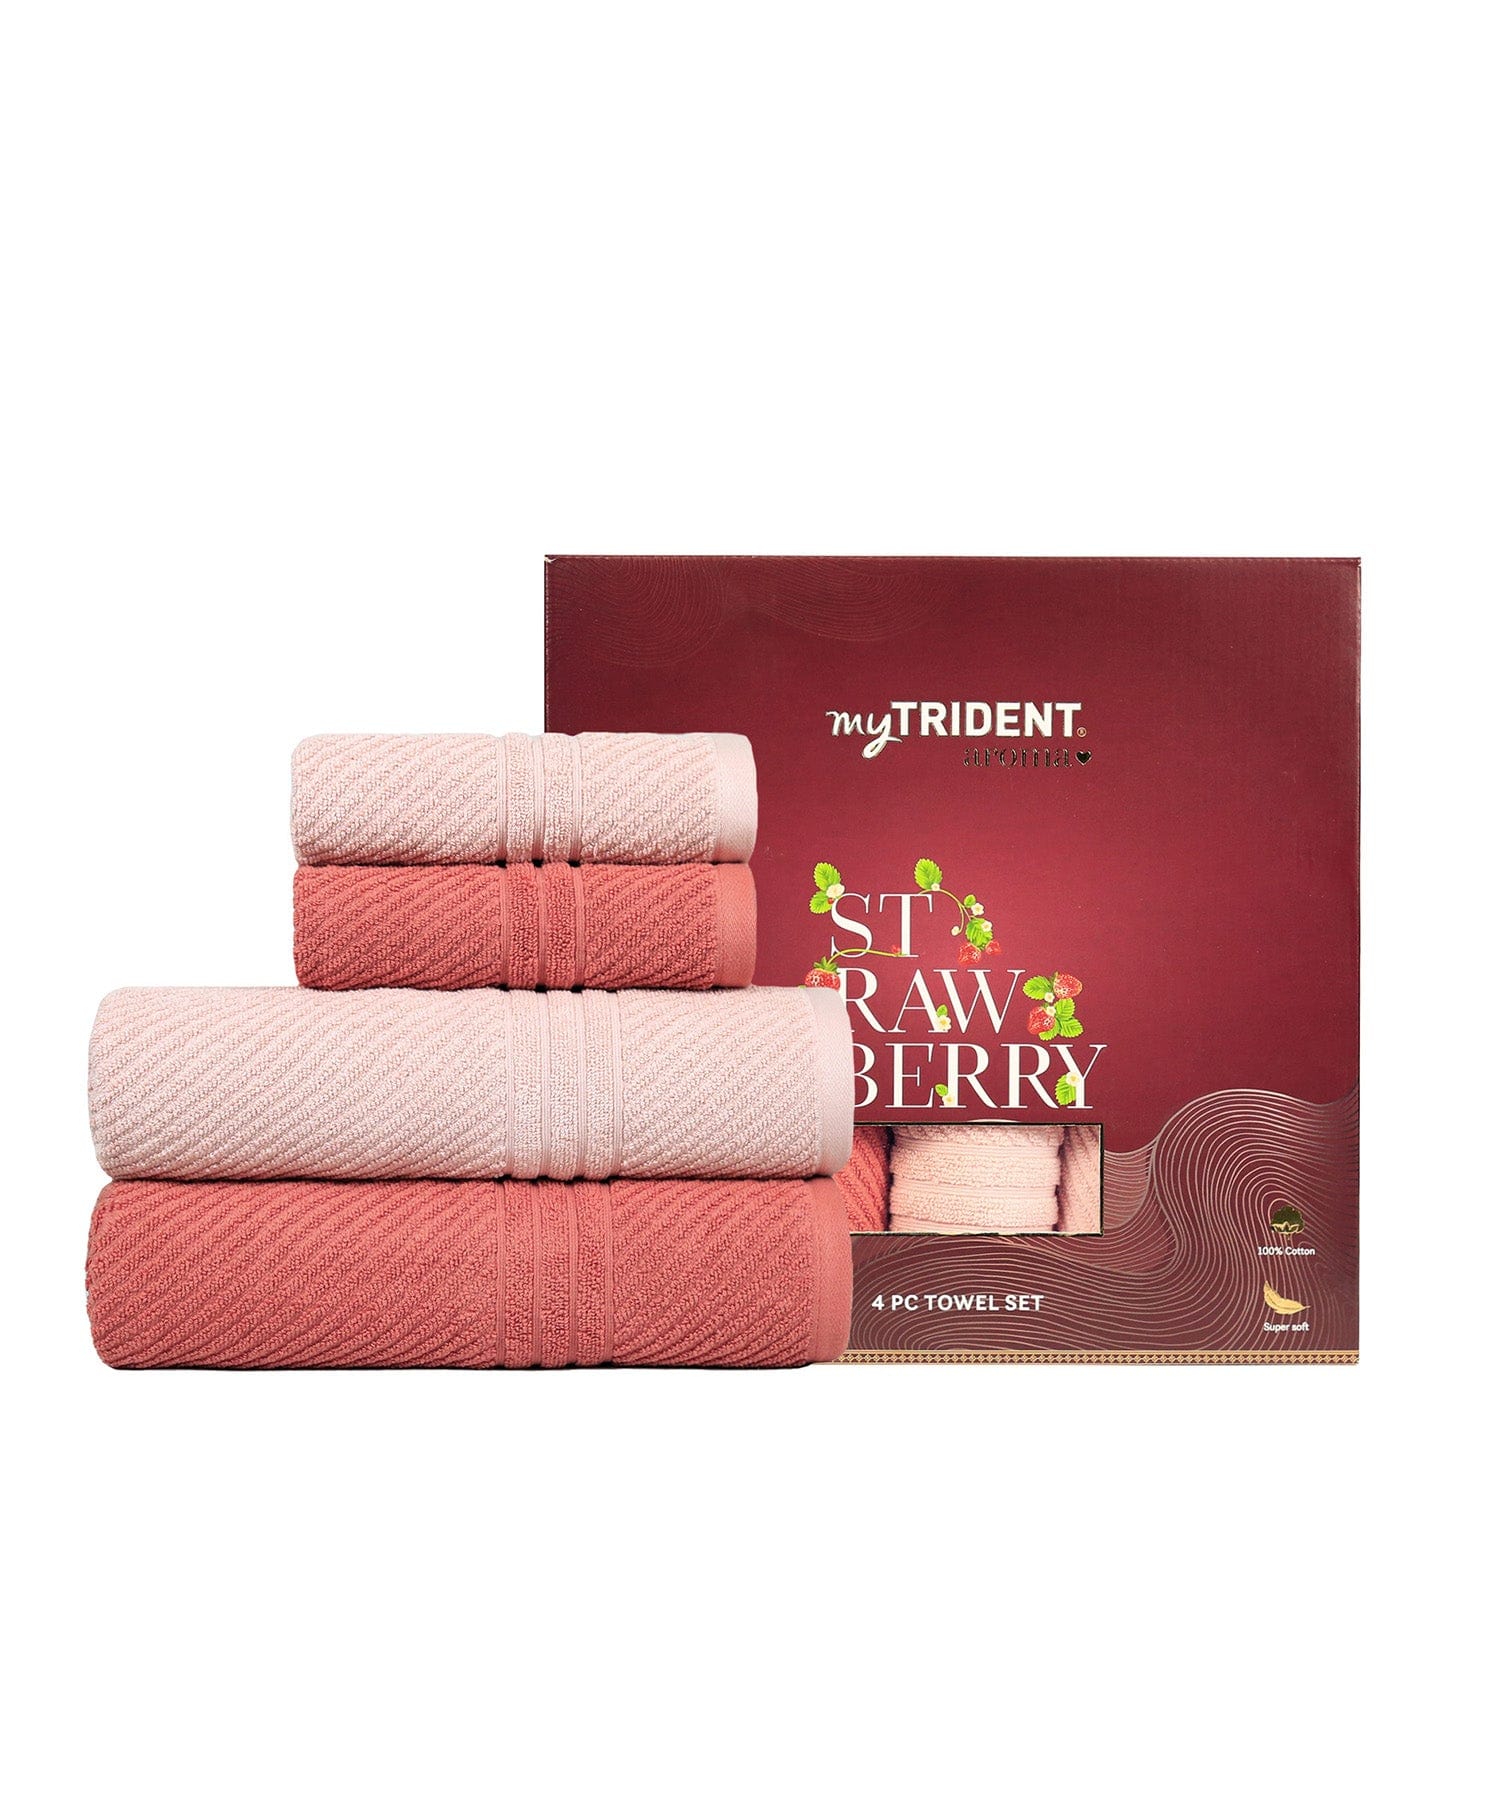 500 GSM , AROMA TOWEL,100% Cotton,Durable,Super Soft, STAWBERRY